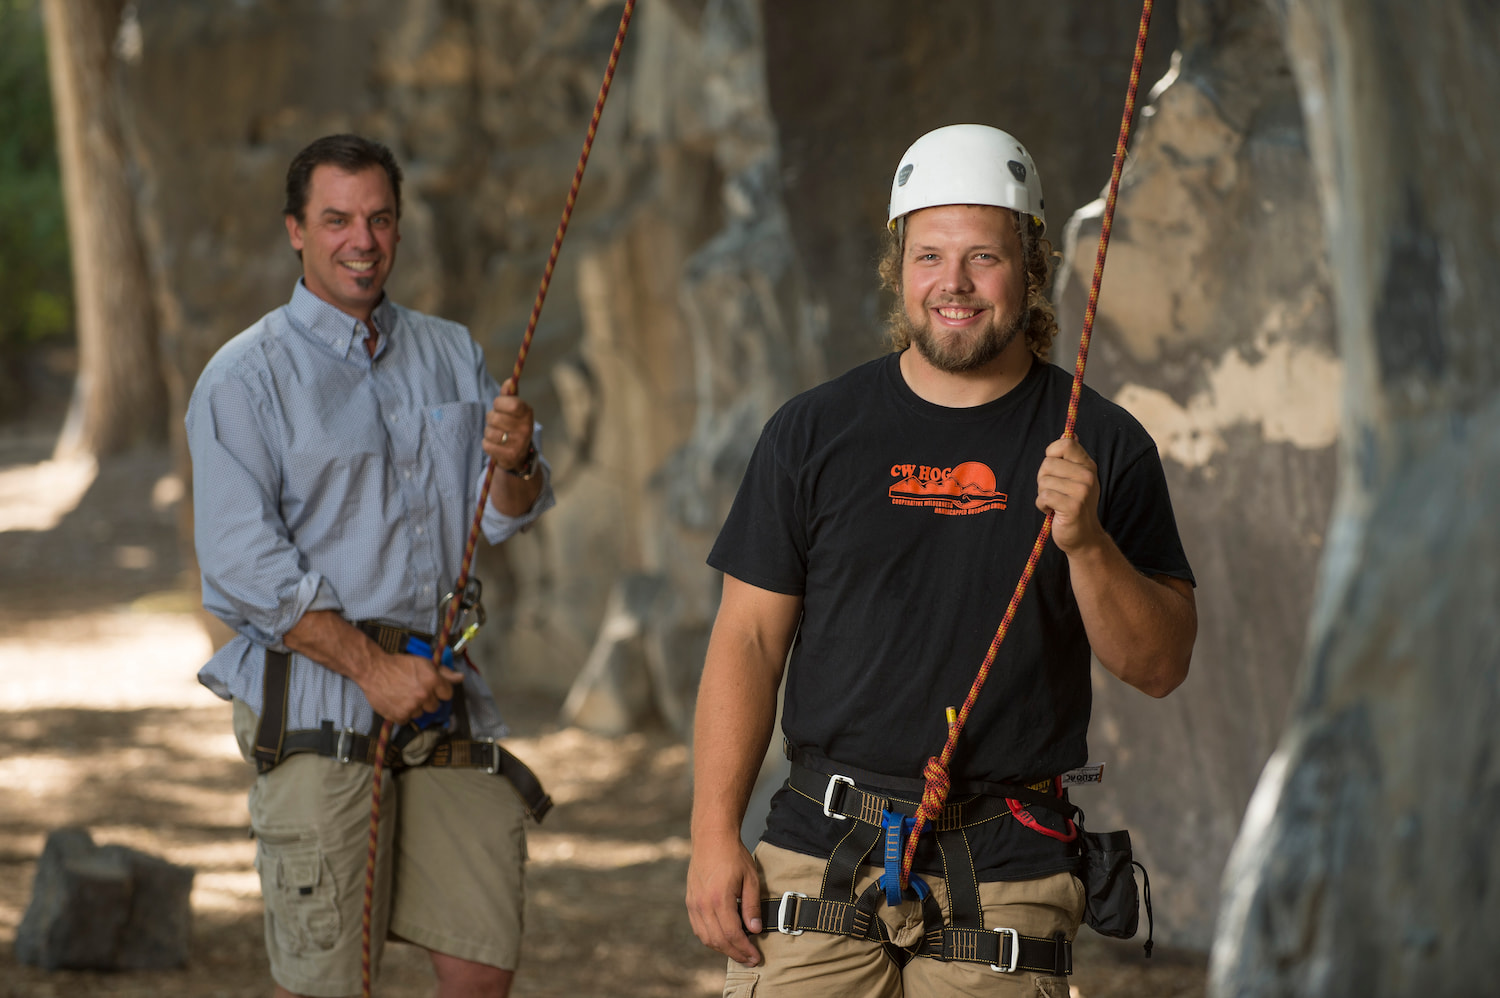 Two men harnessed up, ready to rock climb